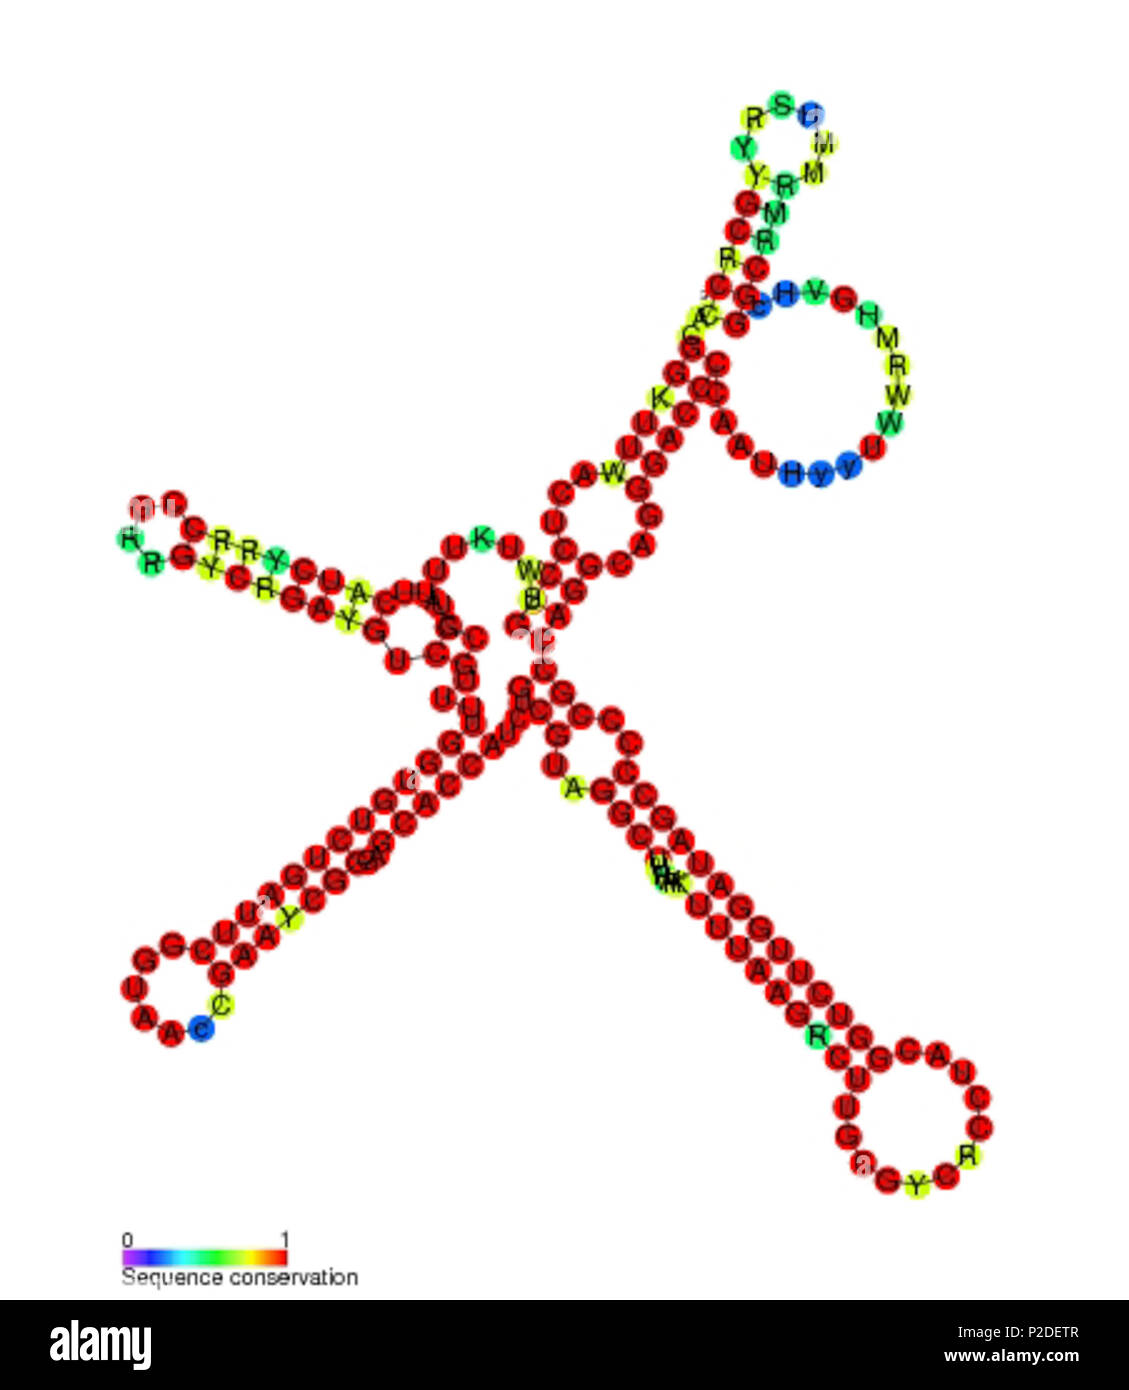 . Secondary structure and sequence conservation image for P27 non coding RNA (RF01674). Nucleotide colouring indicates sequence conservation between the members of this family. May 2011. Rfam database 39 P27 secondary structure Stock Photo